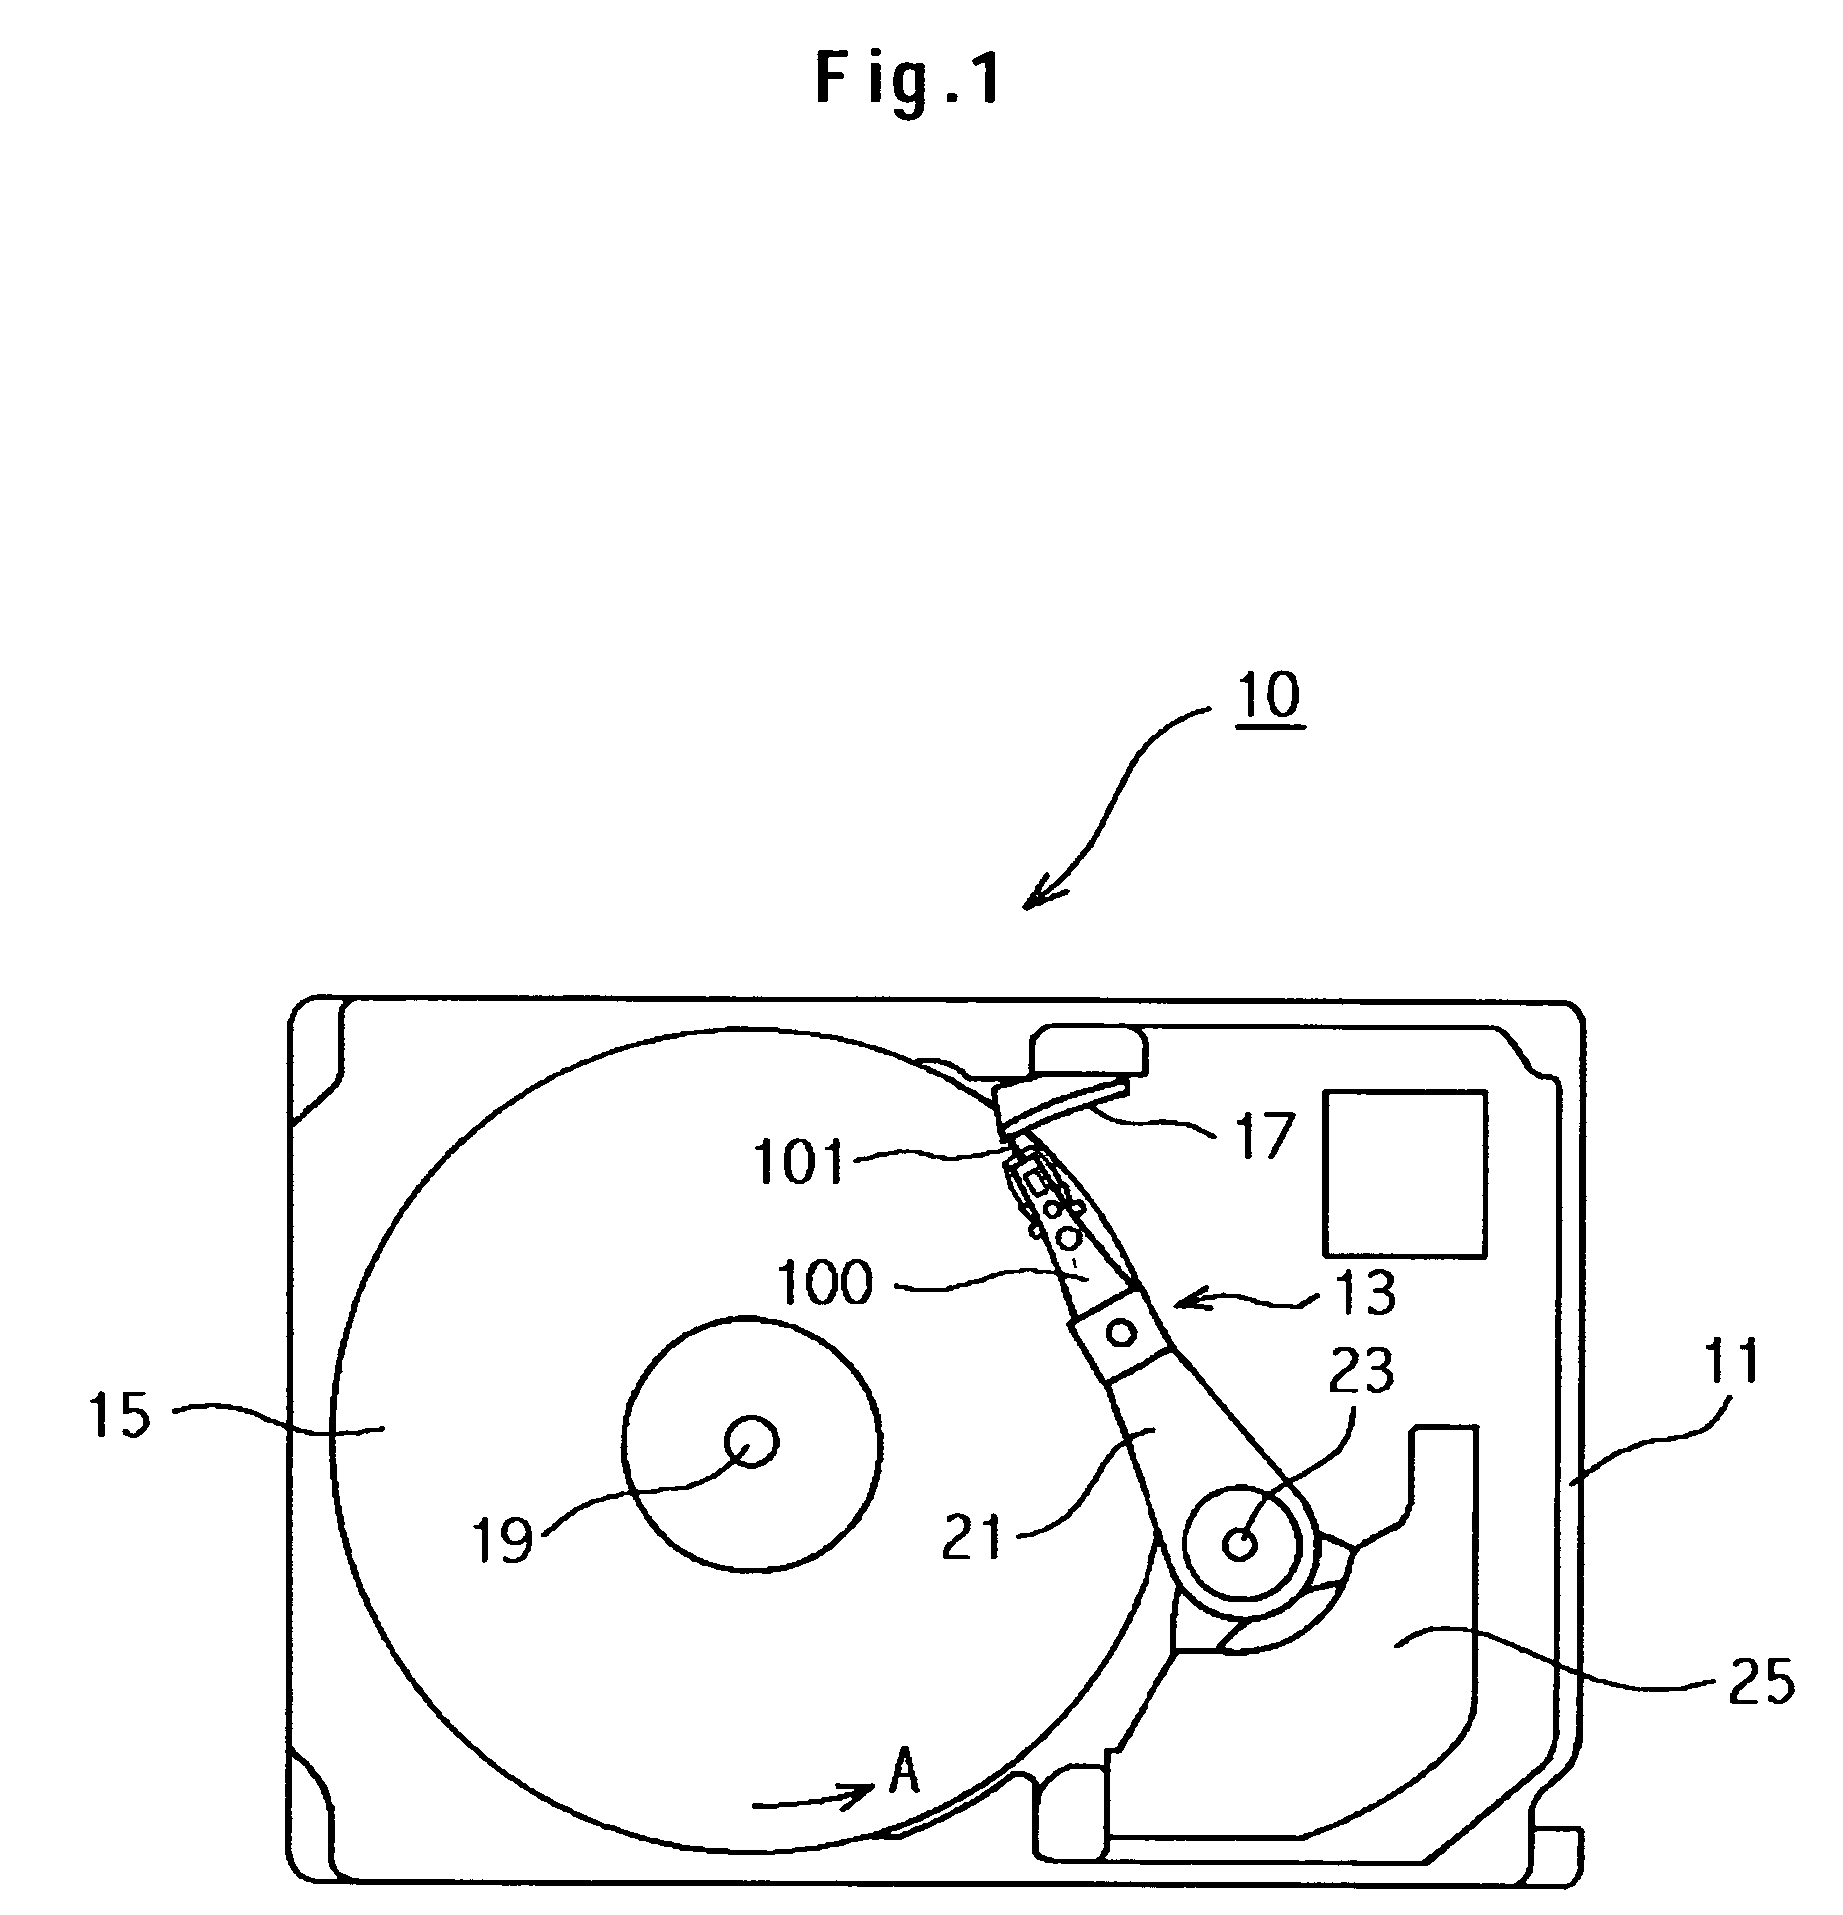 Magnetic disk drive using femto slider and having predetermined linear velocity and gram load configuration